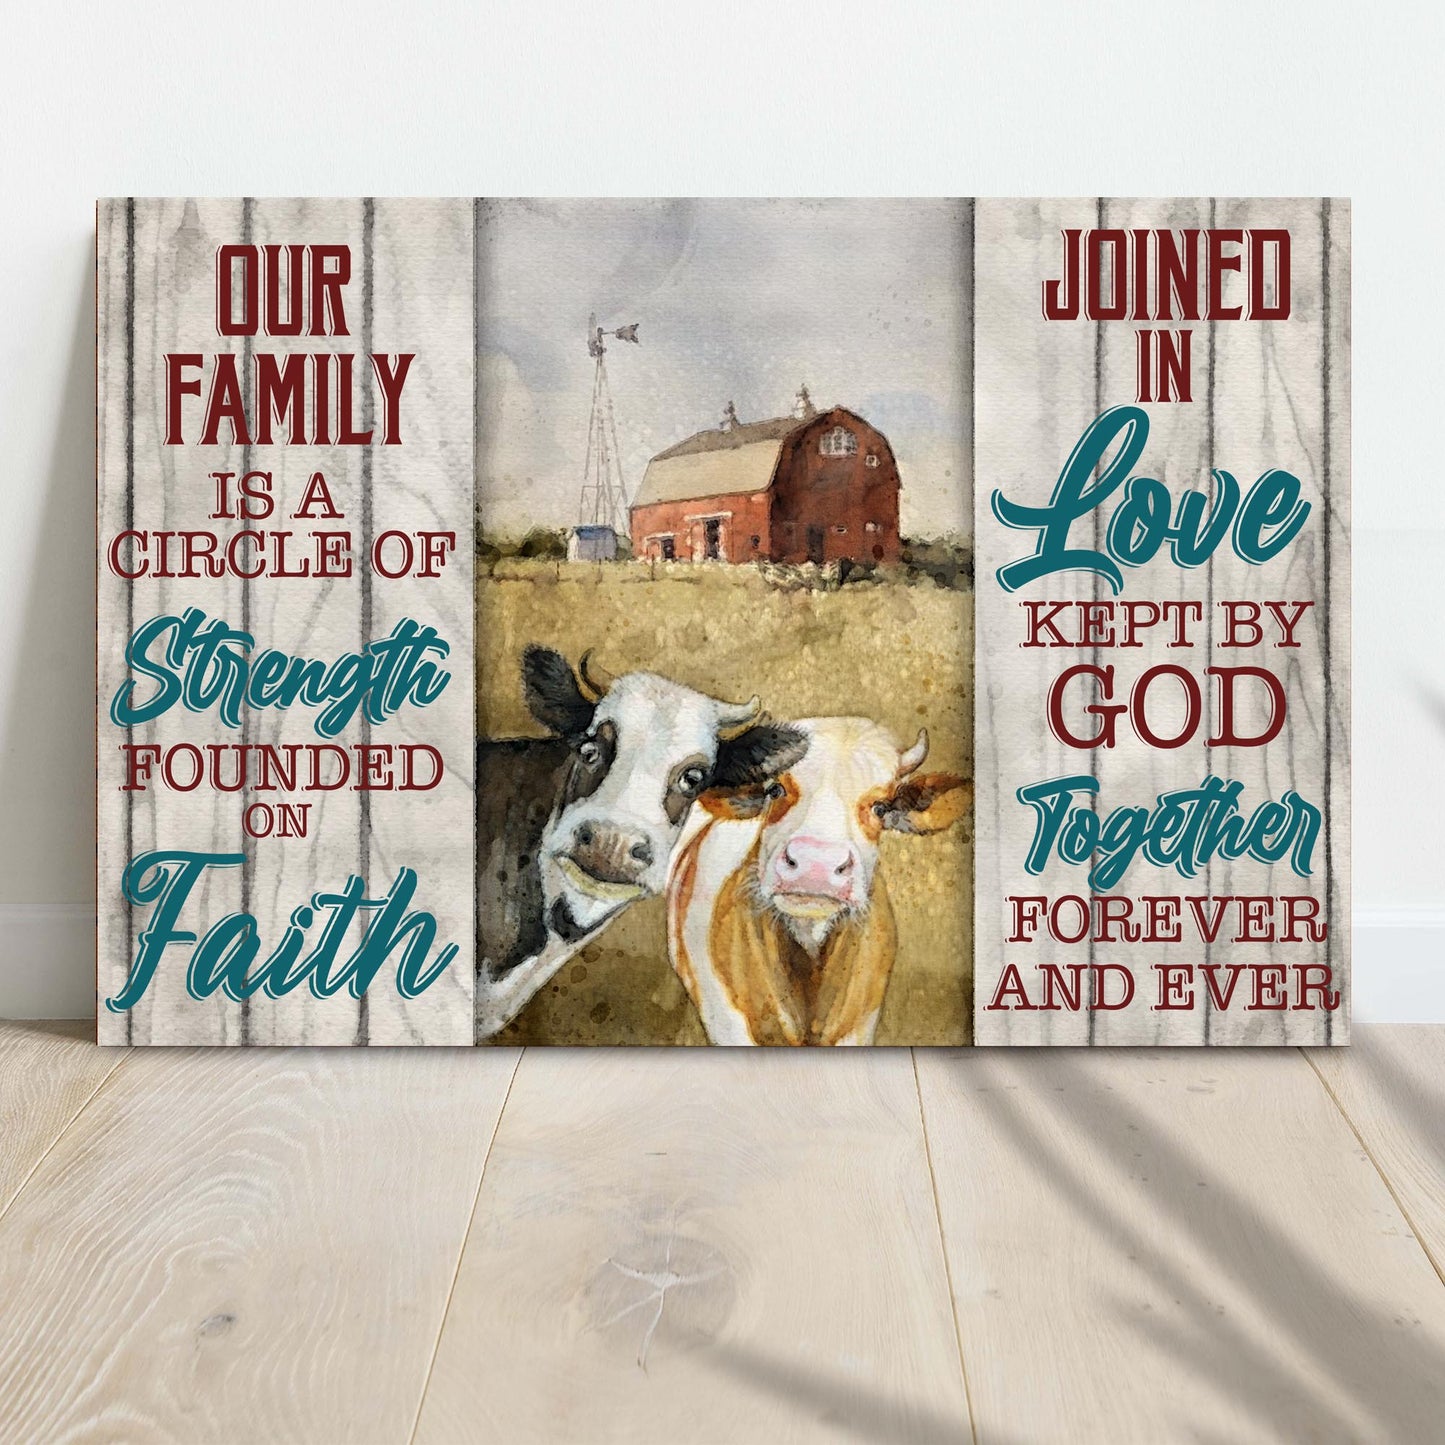 Our Family Is A Circle of Strength Cow Canvas - Image by Tailored Canvases